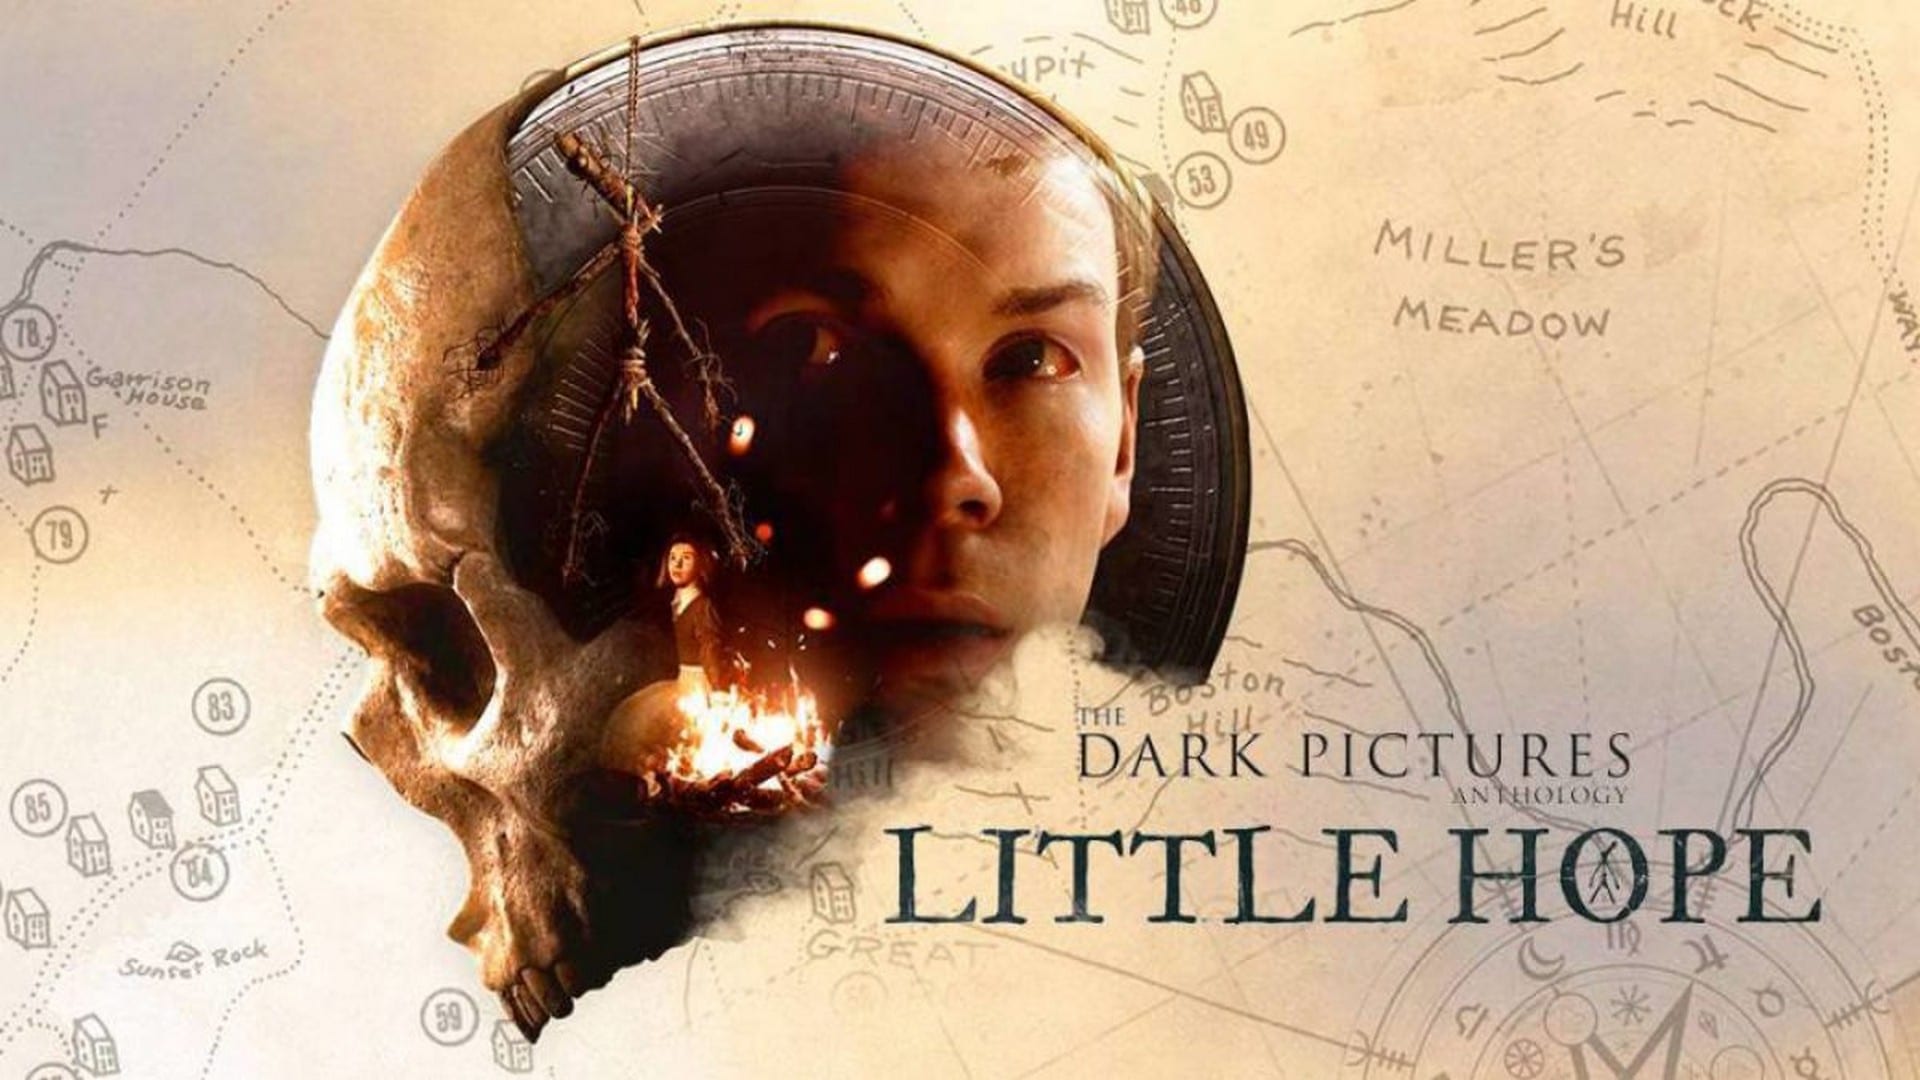 Let’s Play The Dark Pictures Anthology: Little Hope (w/ Mz_Amy_Pond)